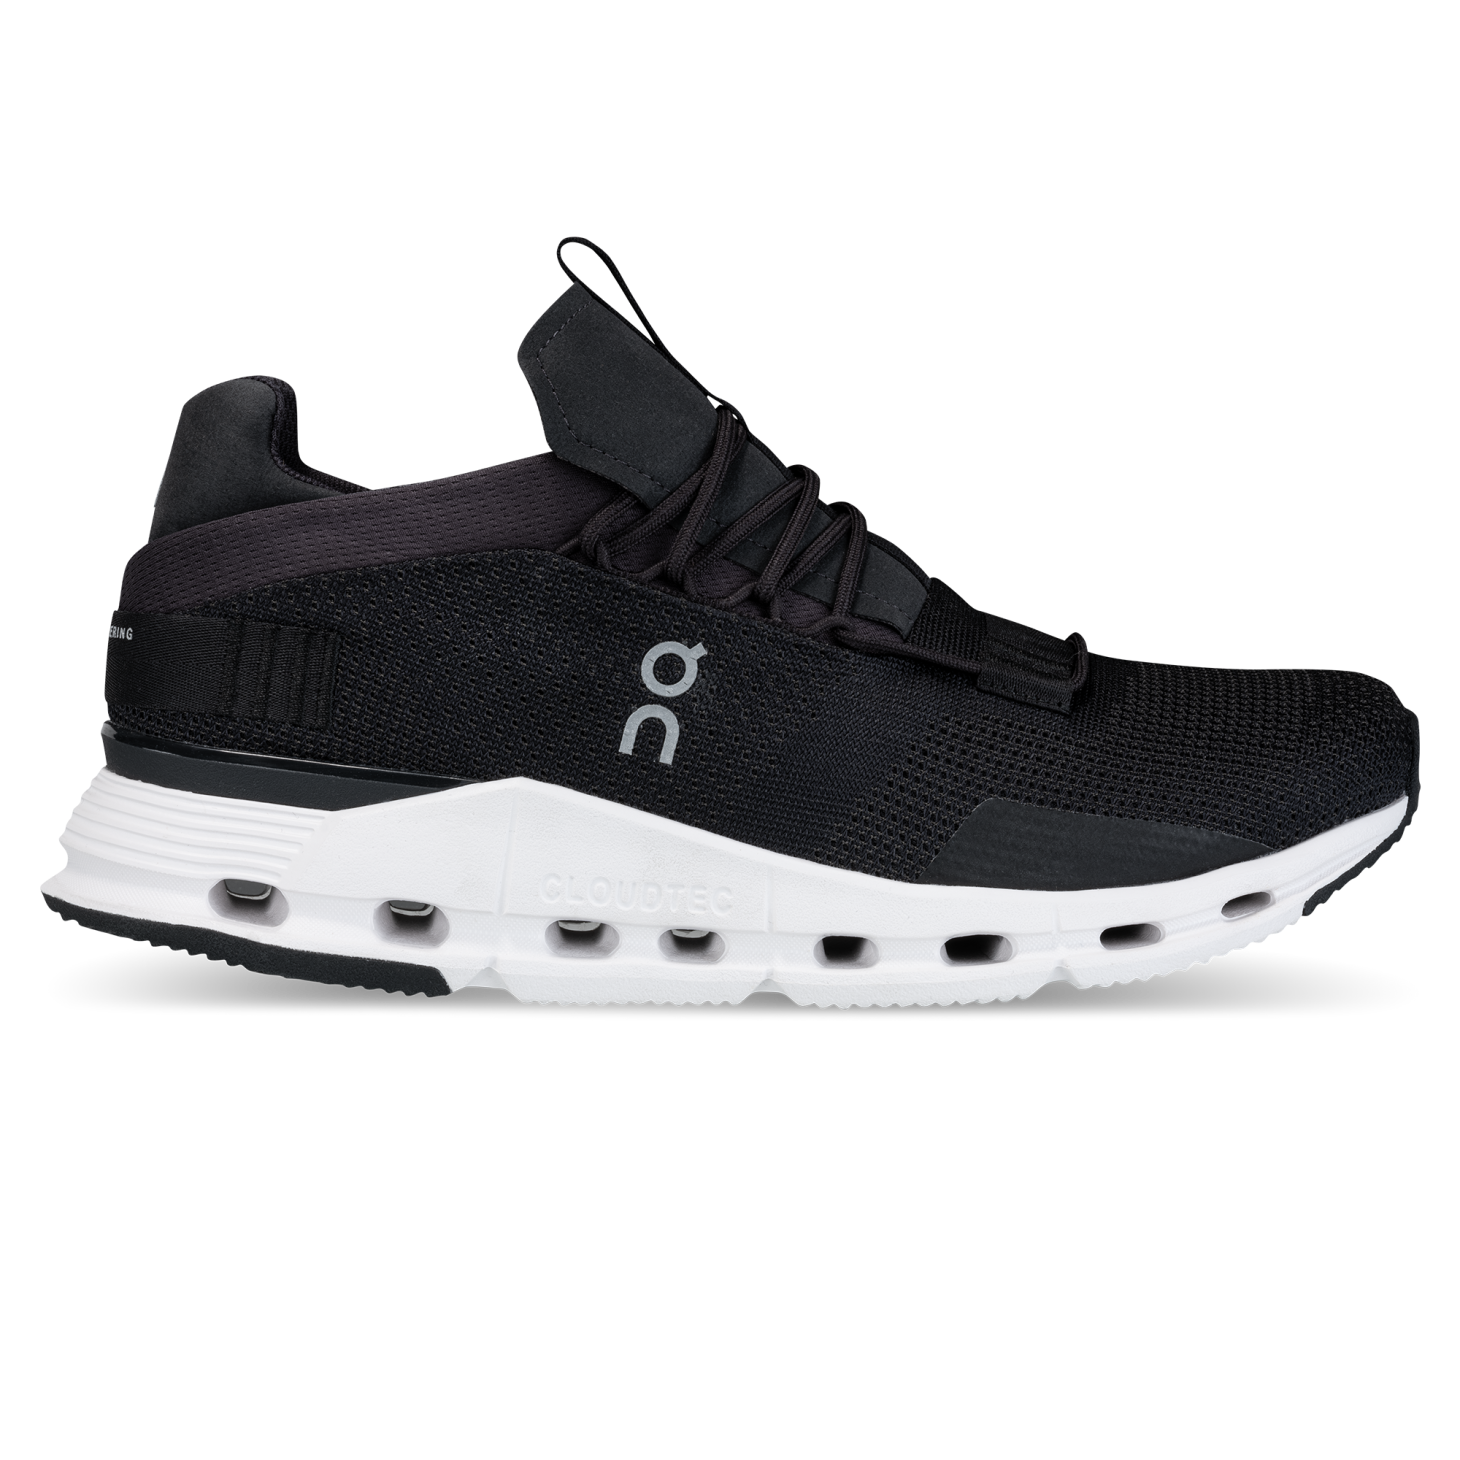 on cloudnovas, one of the best black sneakers for women